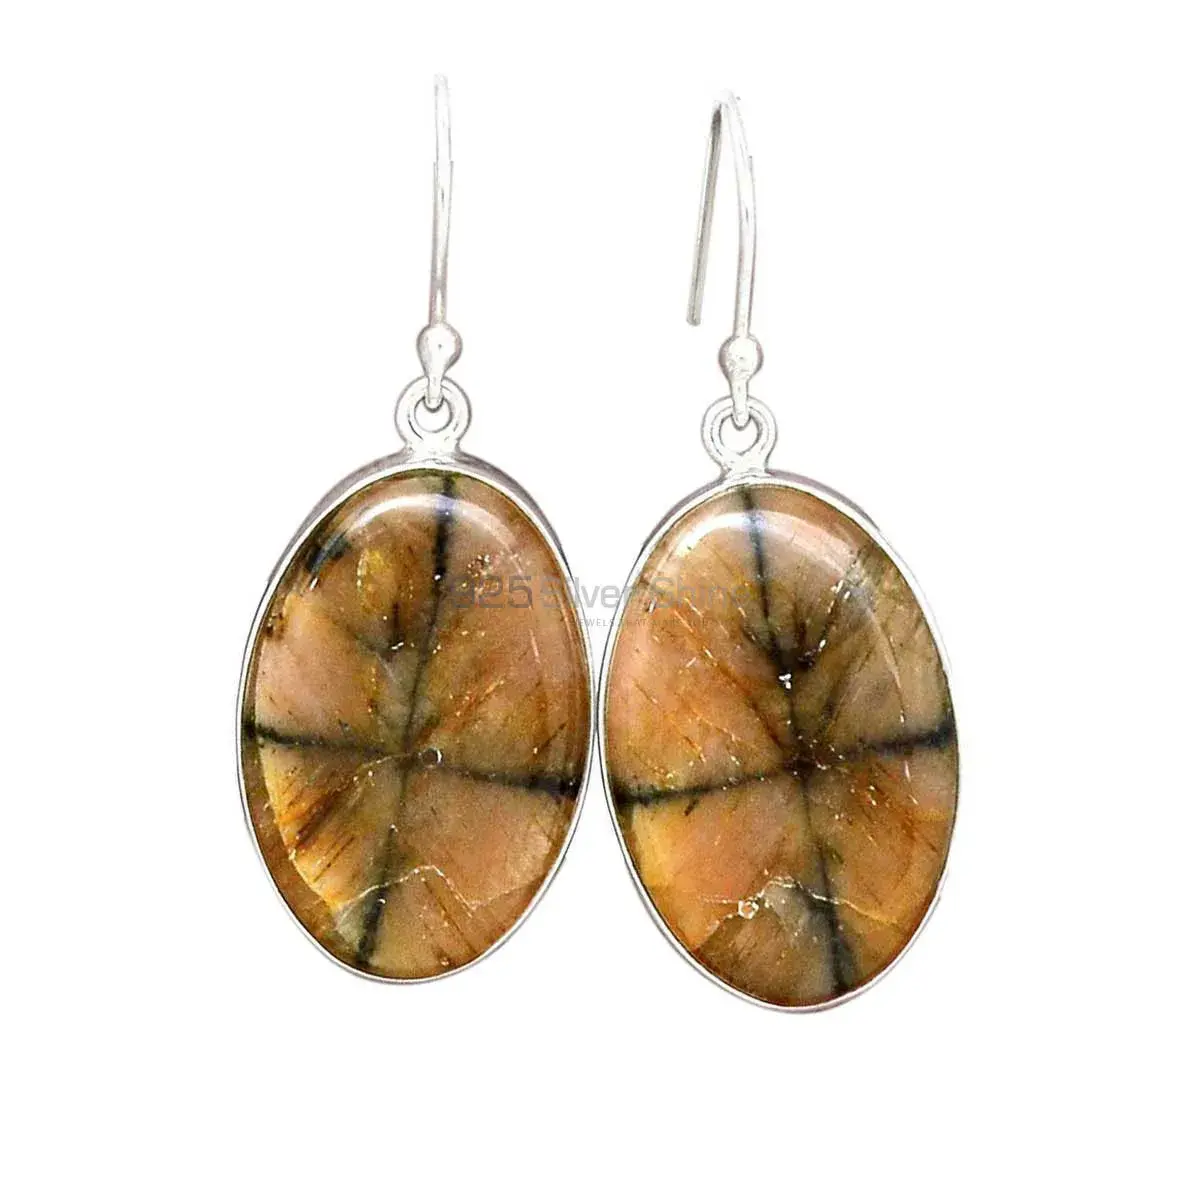 Affordable 925 Sterling Silver Handmade Earrings Manufacturer In Chiastolite Gemstone Jewelry 925SE2748_3